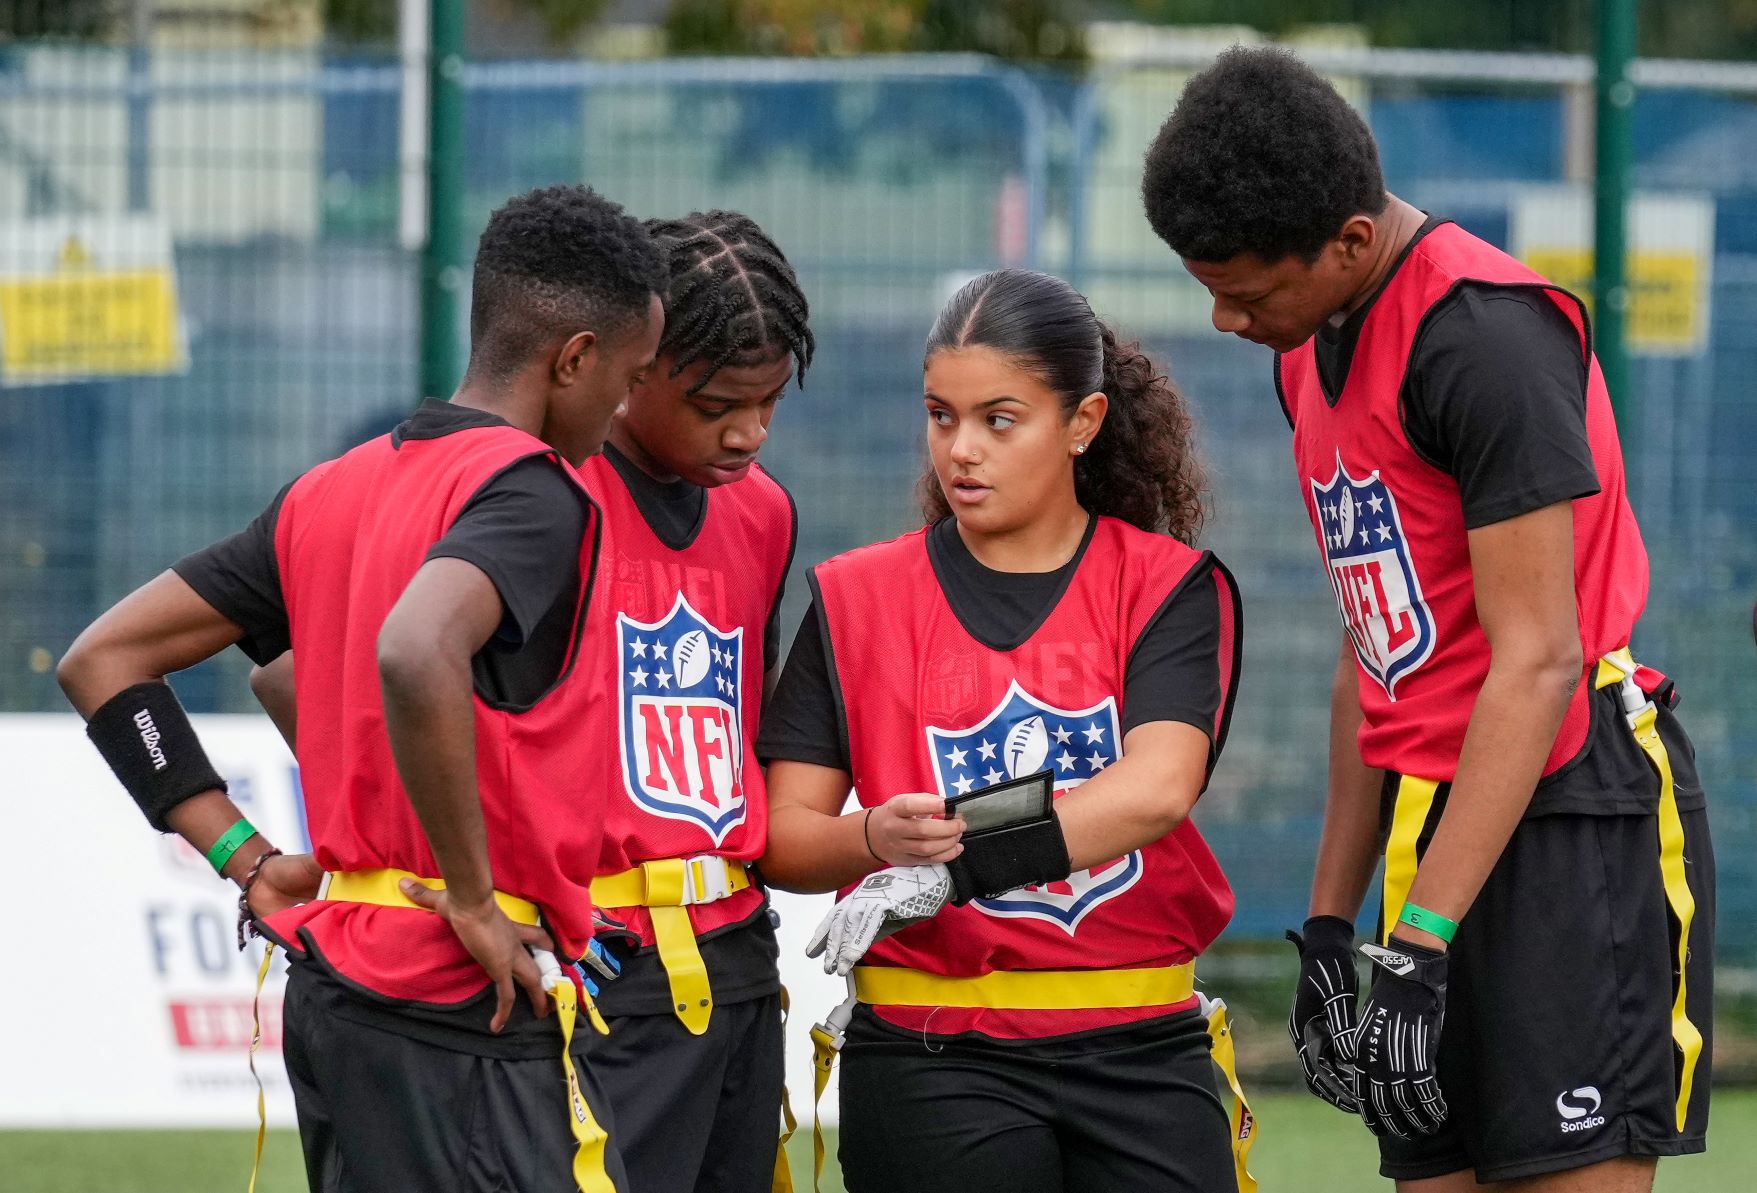 Nfl foundation uk partners with eight community organisations